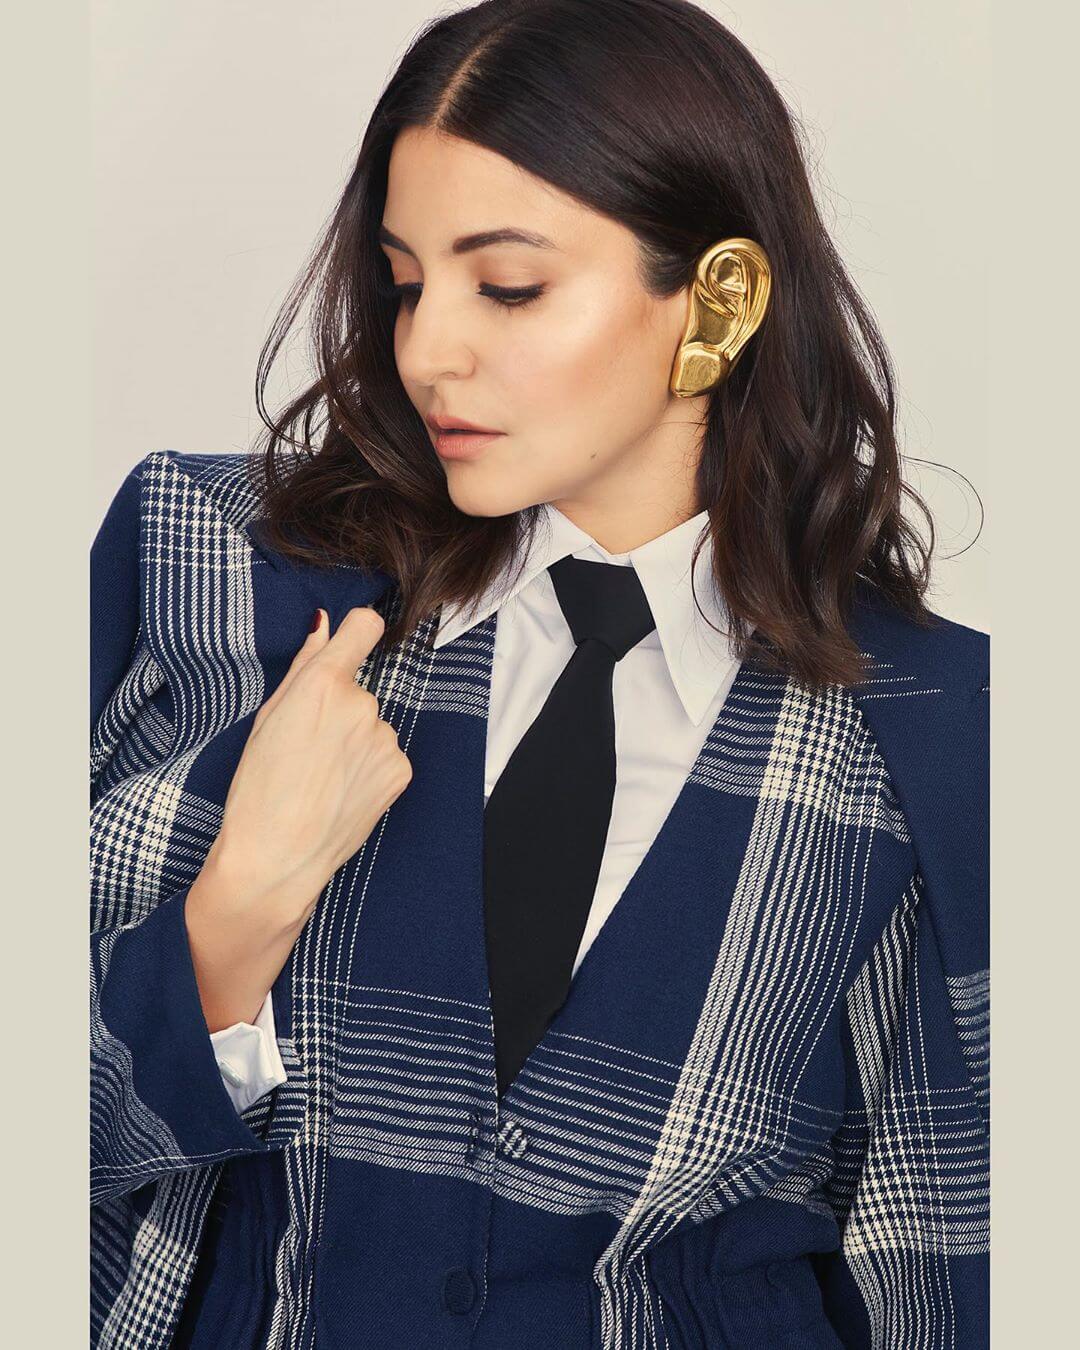 The Ear Cuffs That Became A News Overnight Anushka Sharma’s Earring Designs